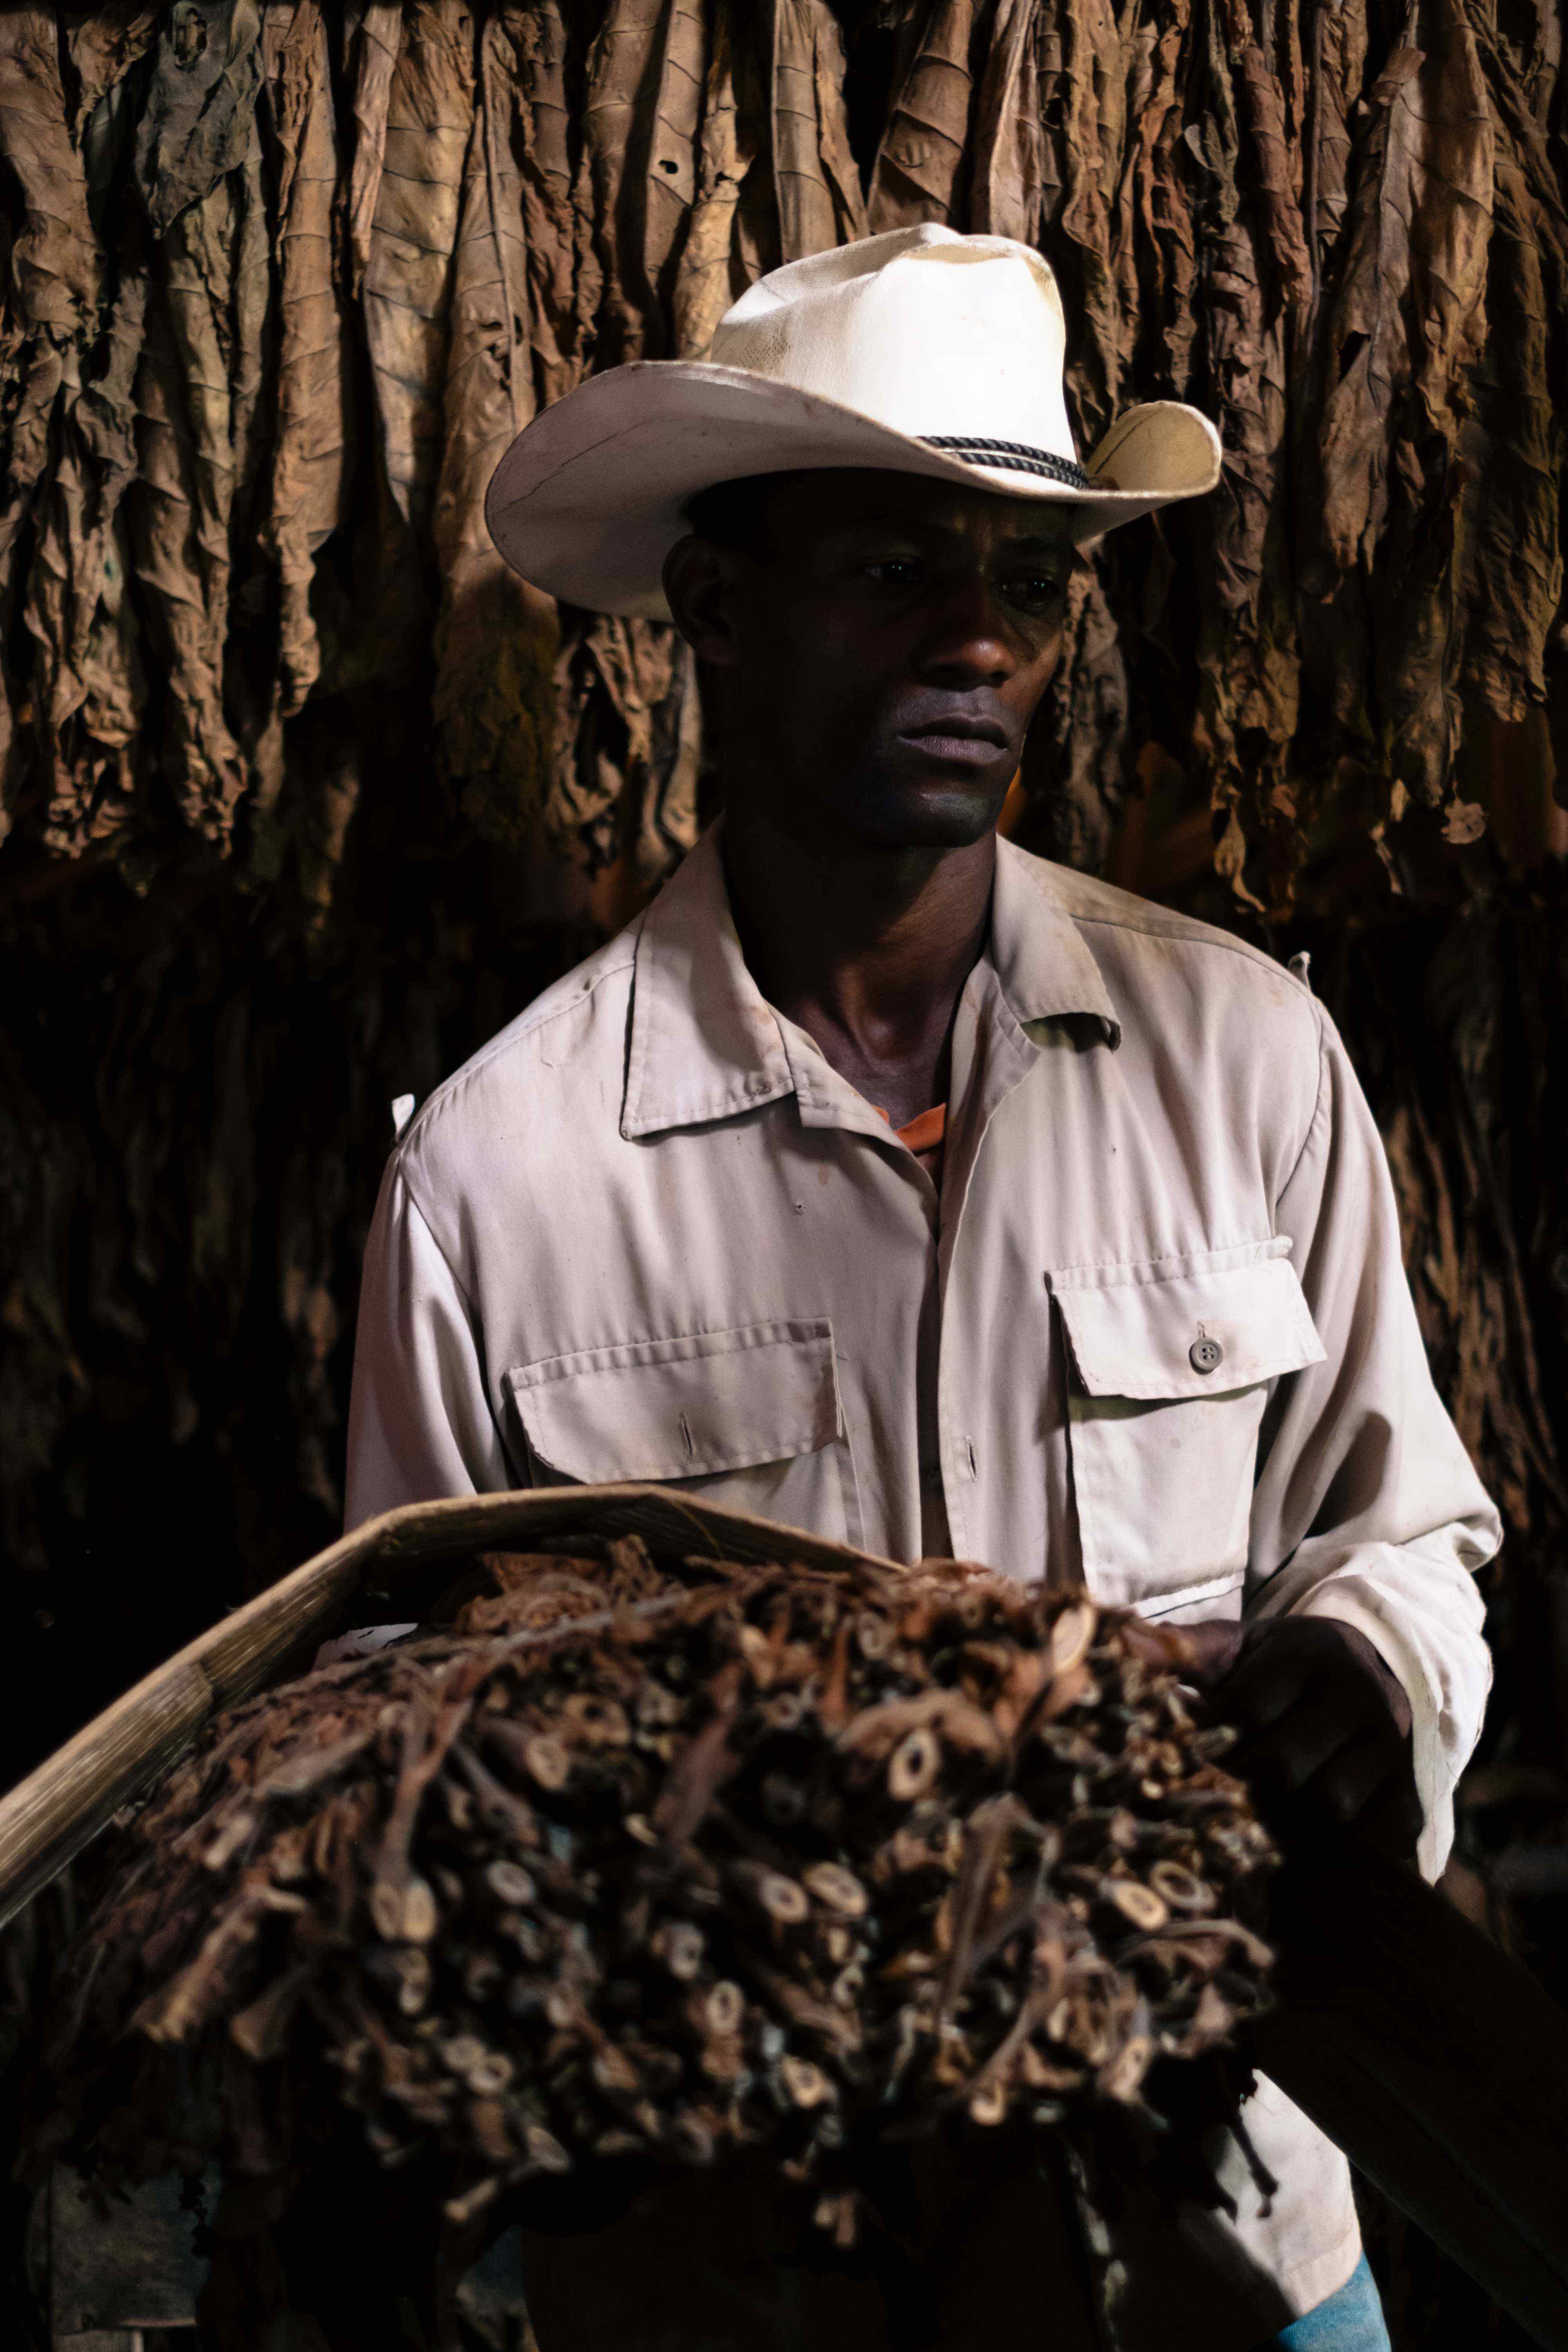 A rural cuban worker. Behind him can see the dry cigar leaves.